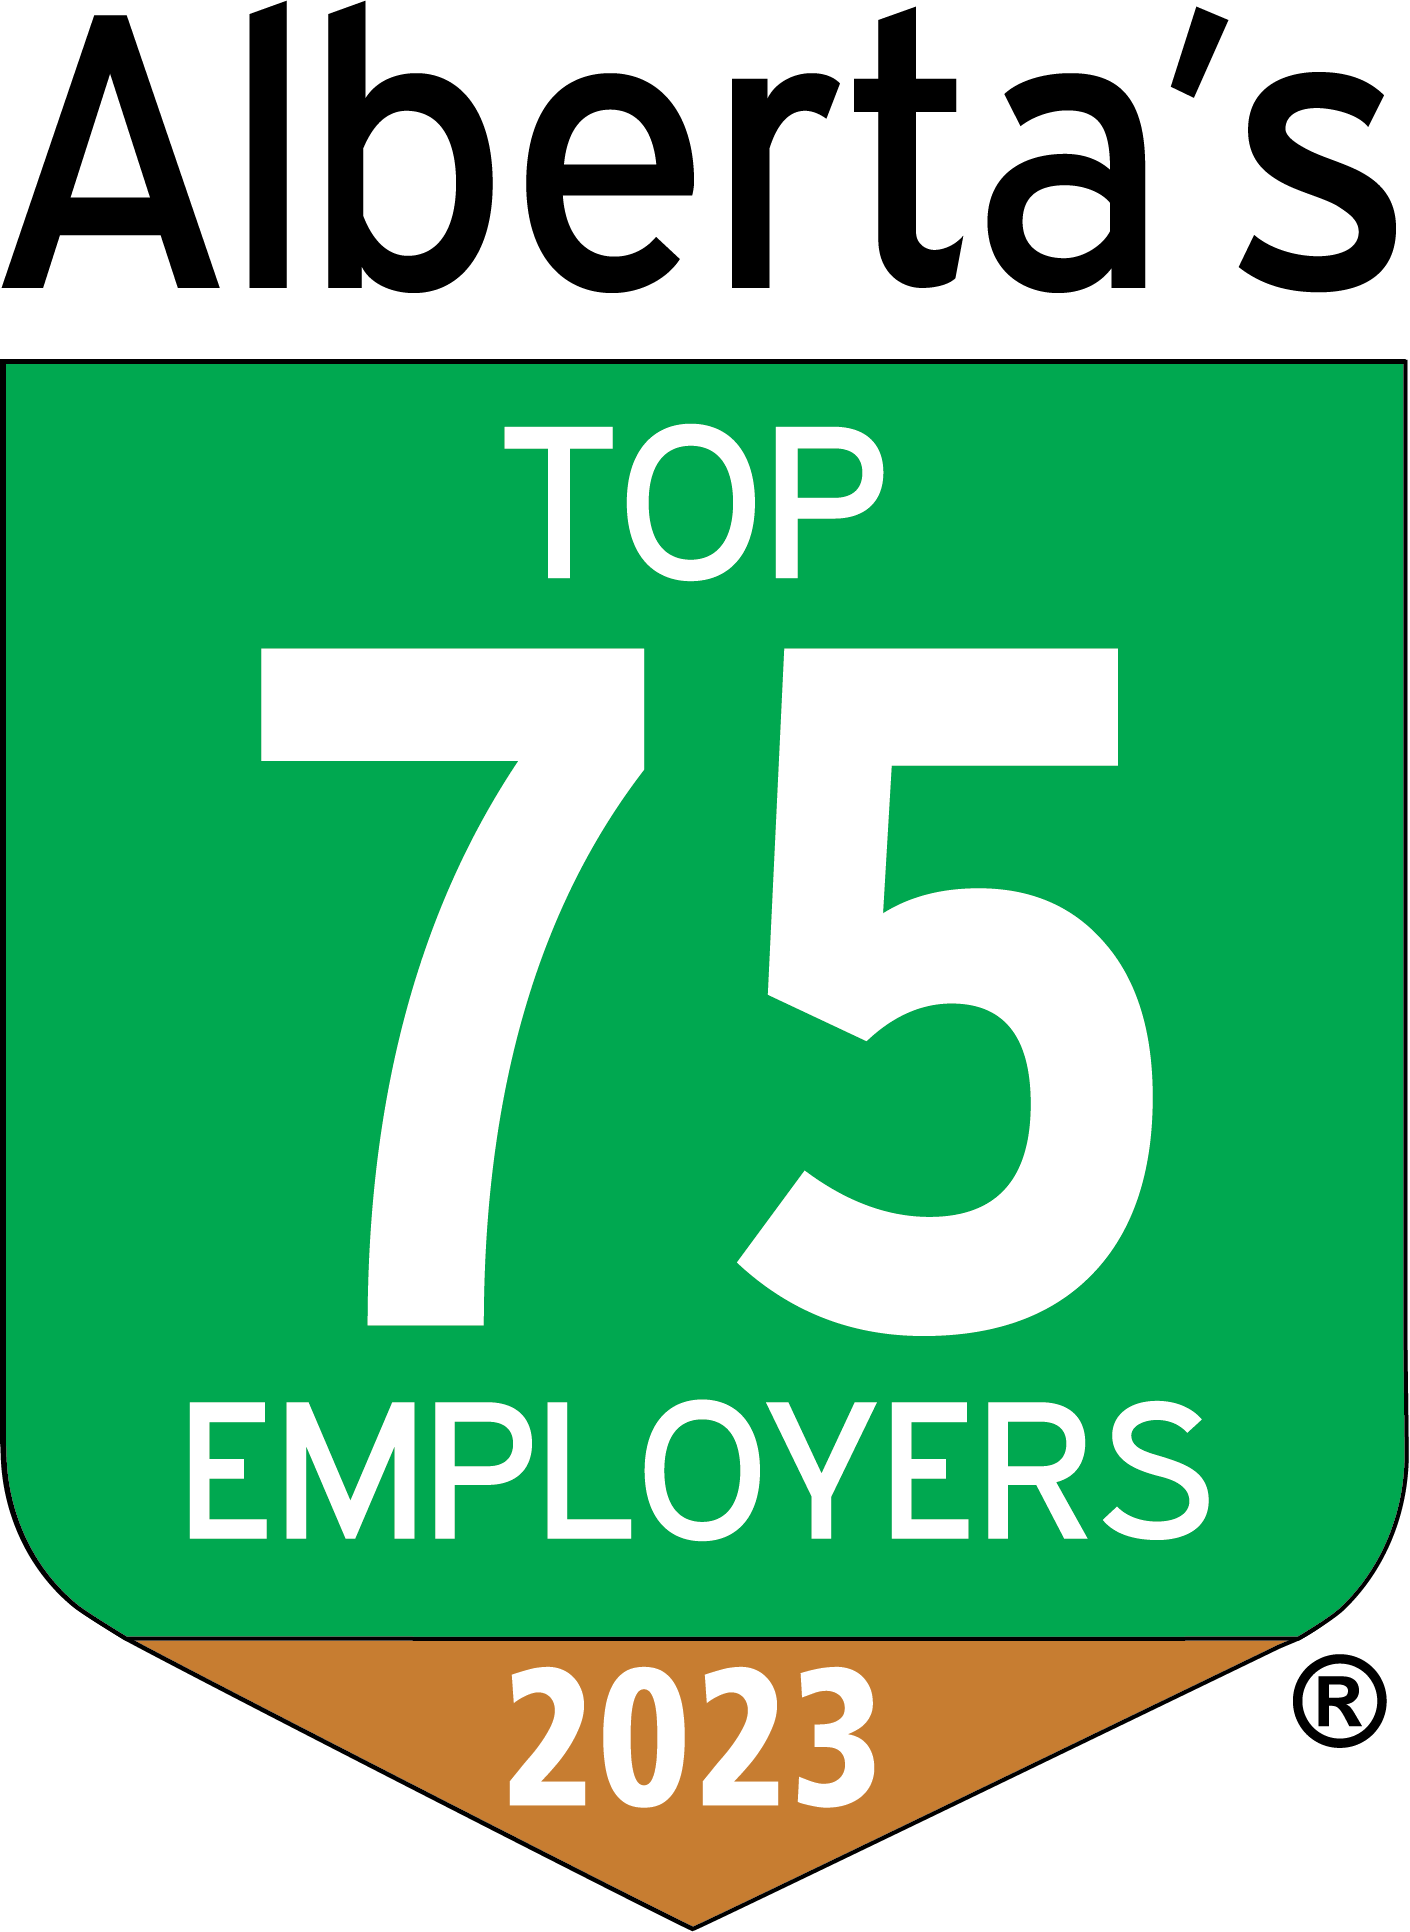 Alberta's Top 75 Employers for 2023